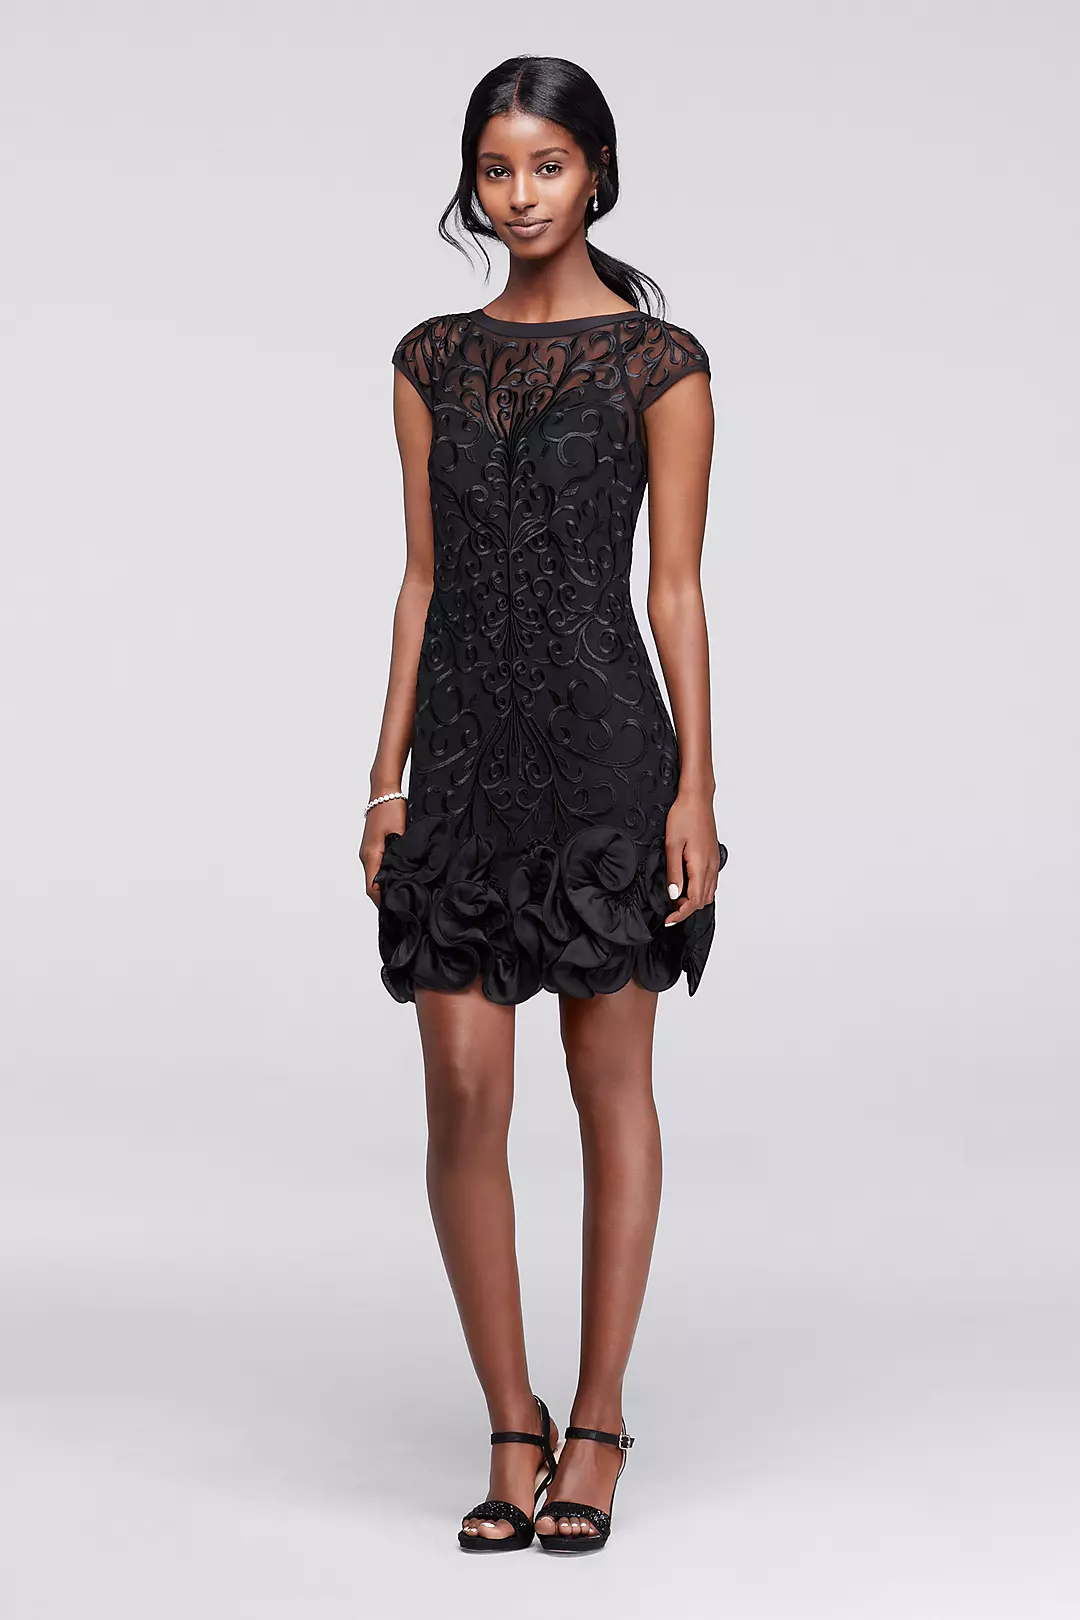 Lace Party Dress with Ruffled Hem and Cap Sleeves Image